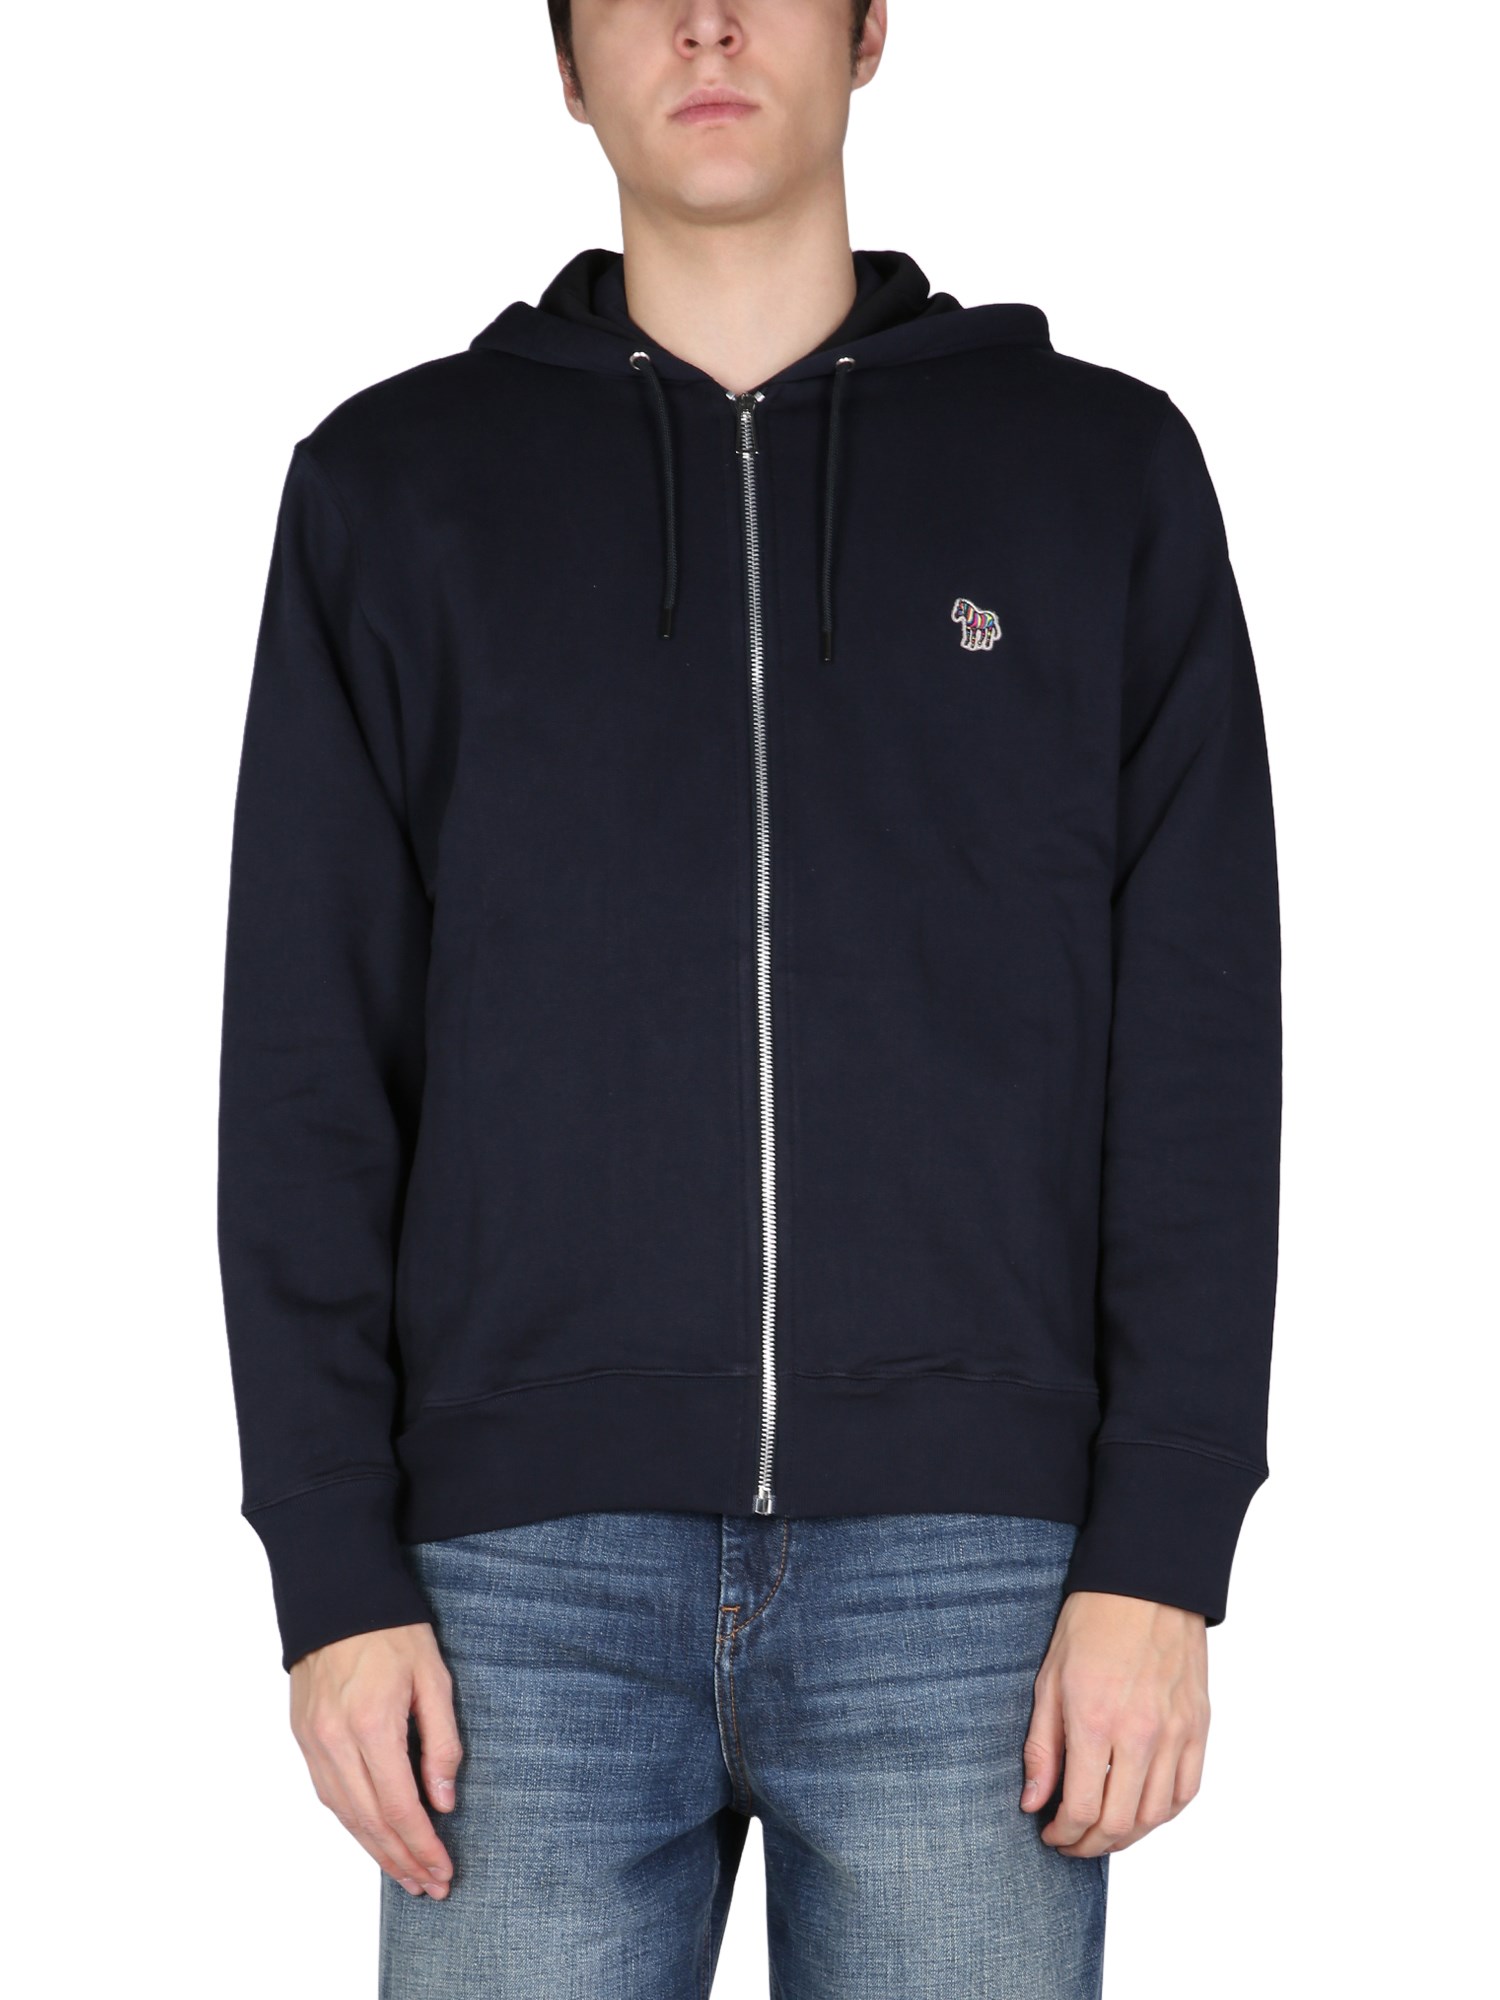 ps by paul smith hoodie